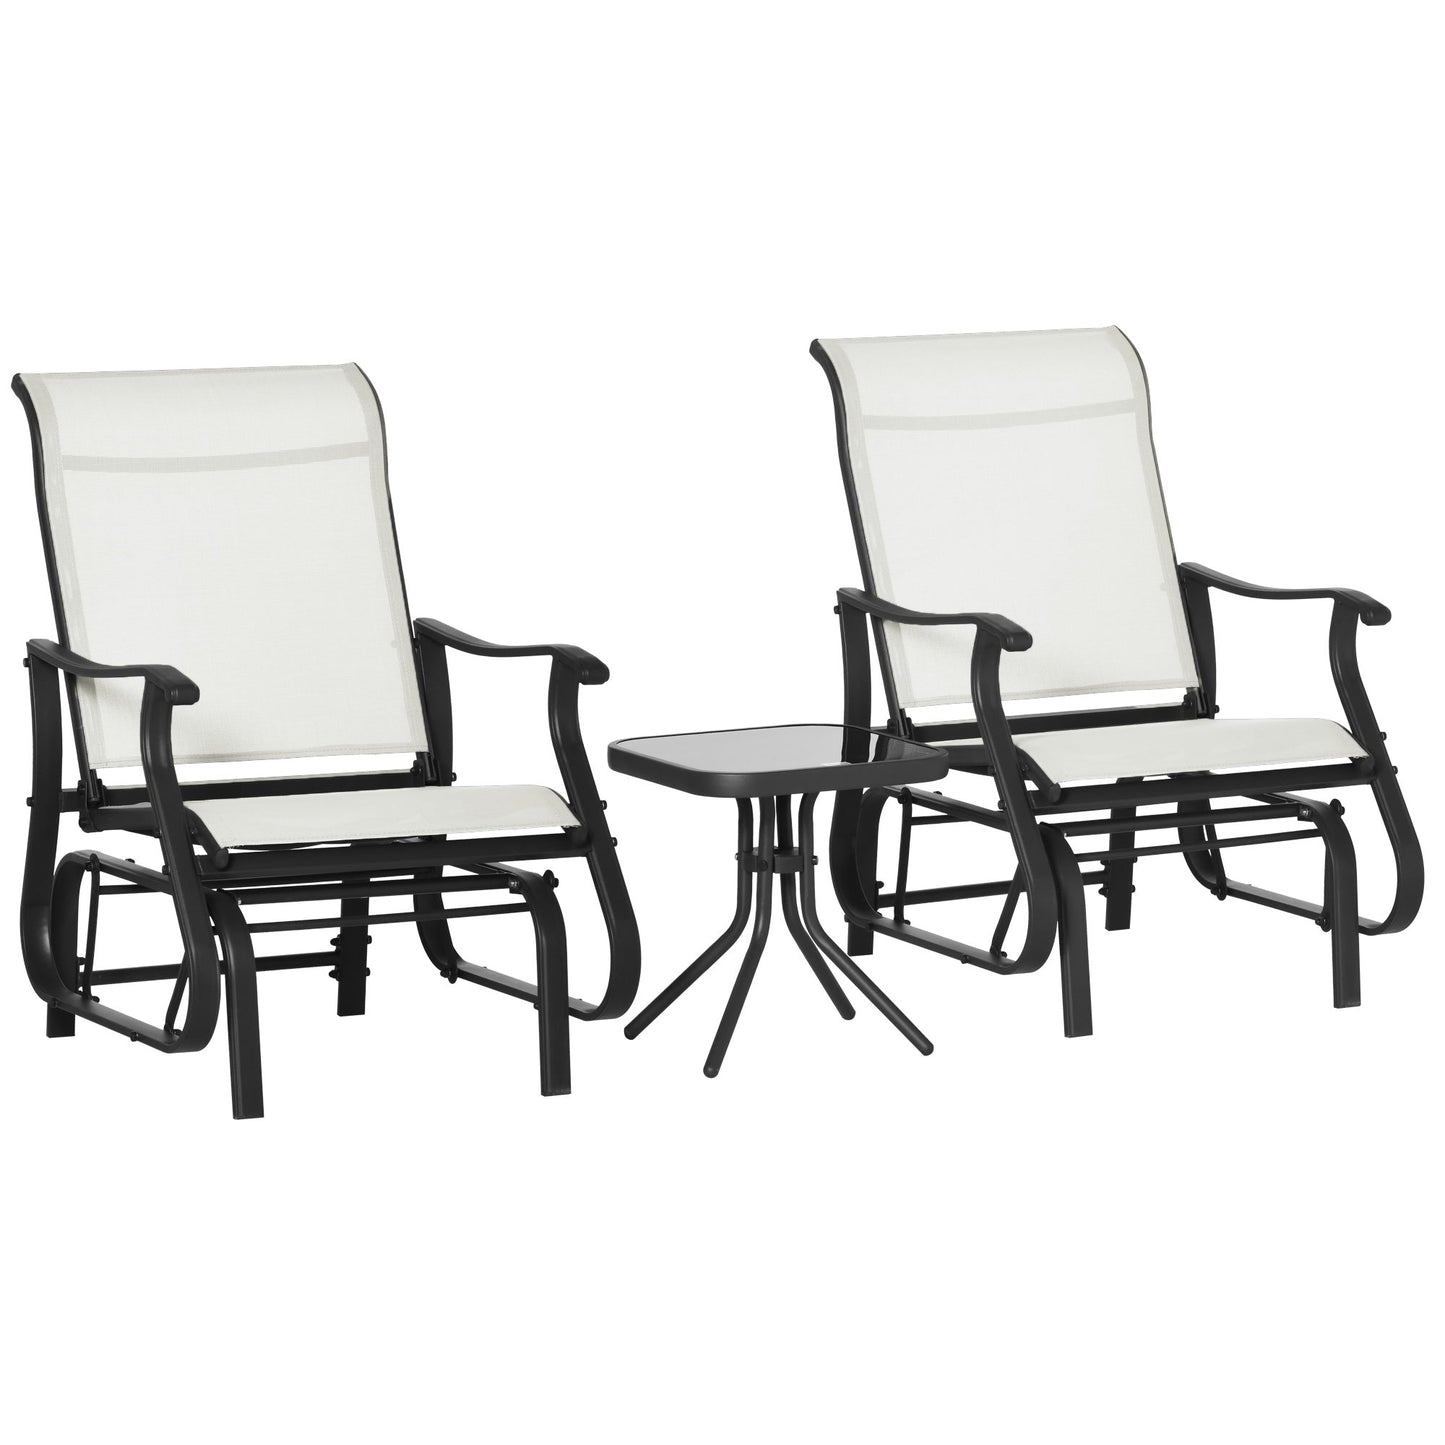 Outdoor and Garden-3-Piece Gliding Chair & Tea Table Set, Outdoor 2 Rocker Seats with Steel Frame, Tempered Glass Tabletop, Garden Patio Furniture, Cream White - Outdoor Style Company